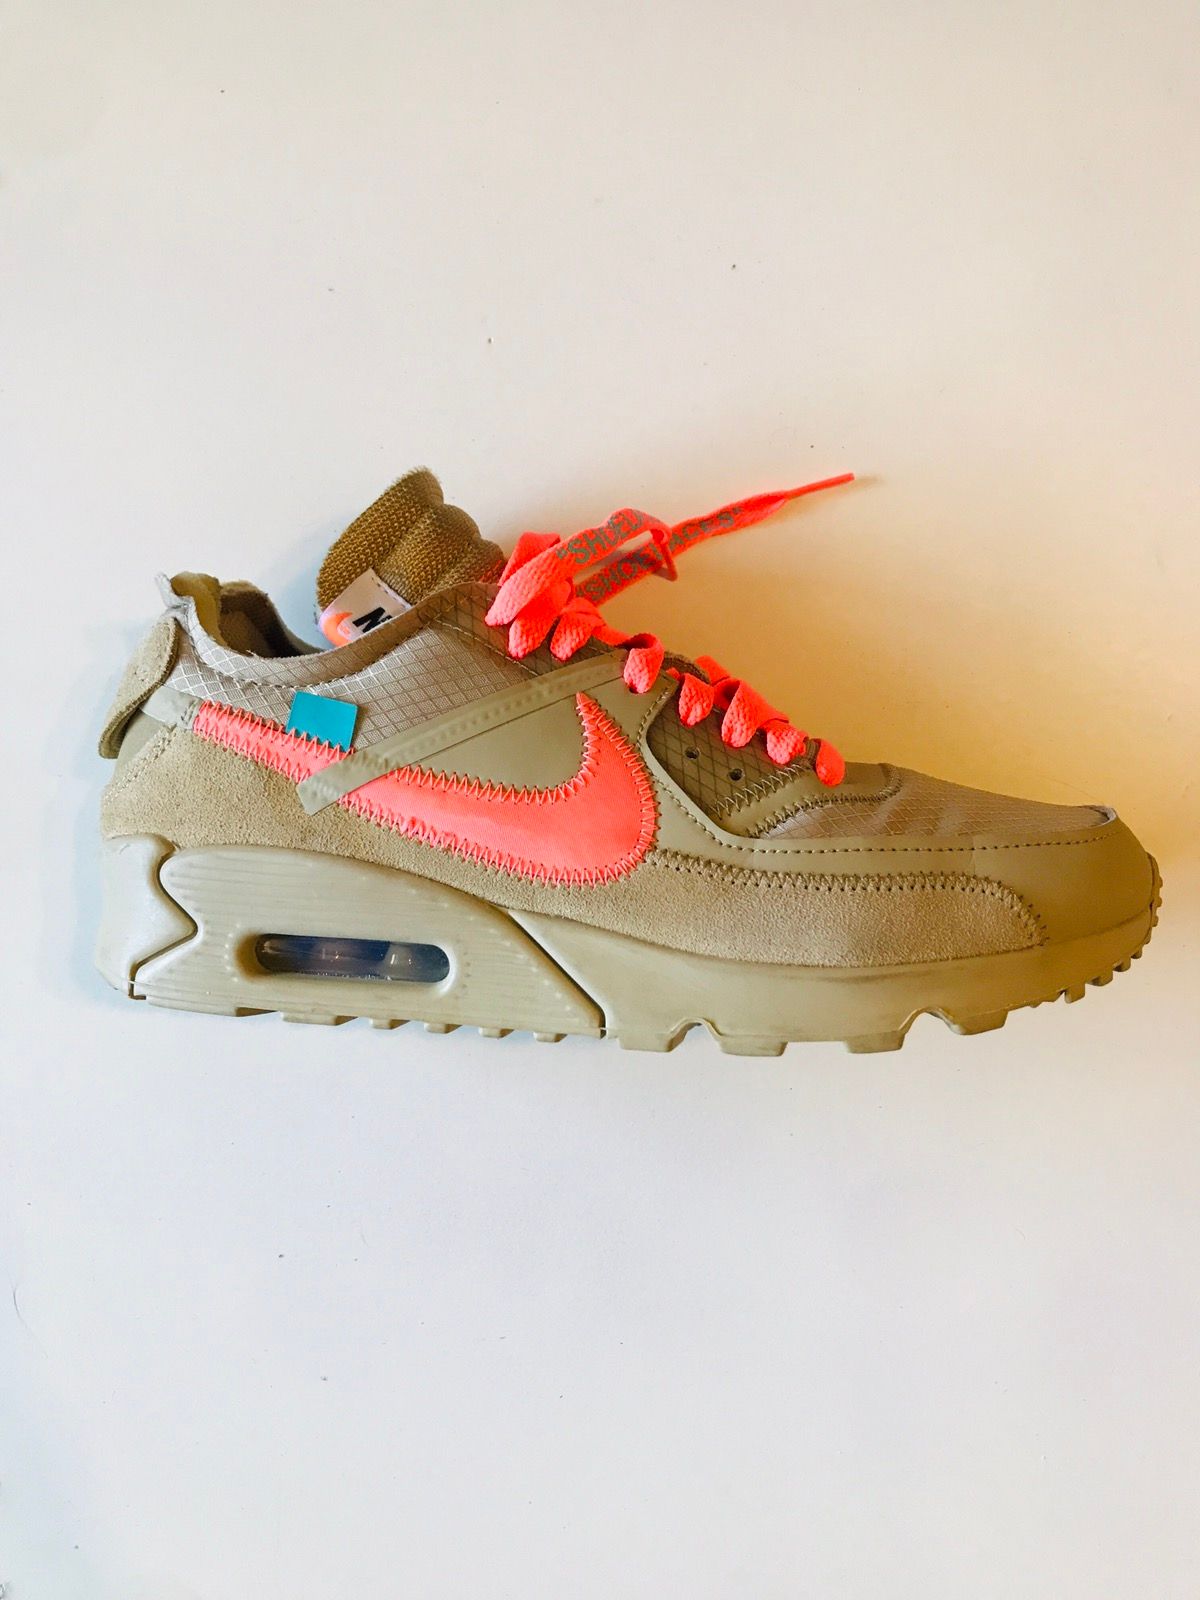 Pre-owned Nike X Off White Off-white X Air Max 90 Desert Ore 2019 Shoes